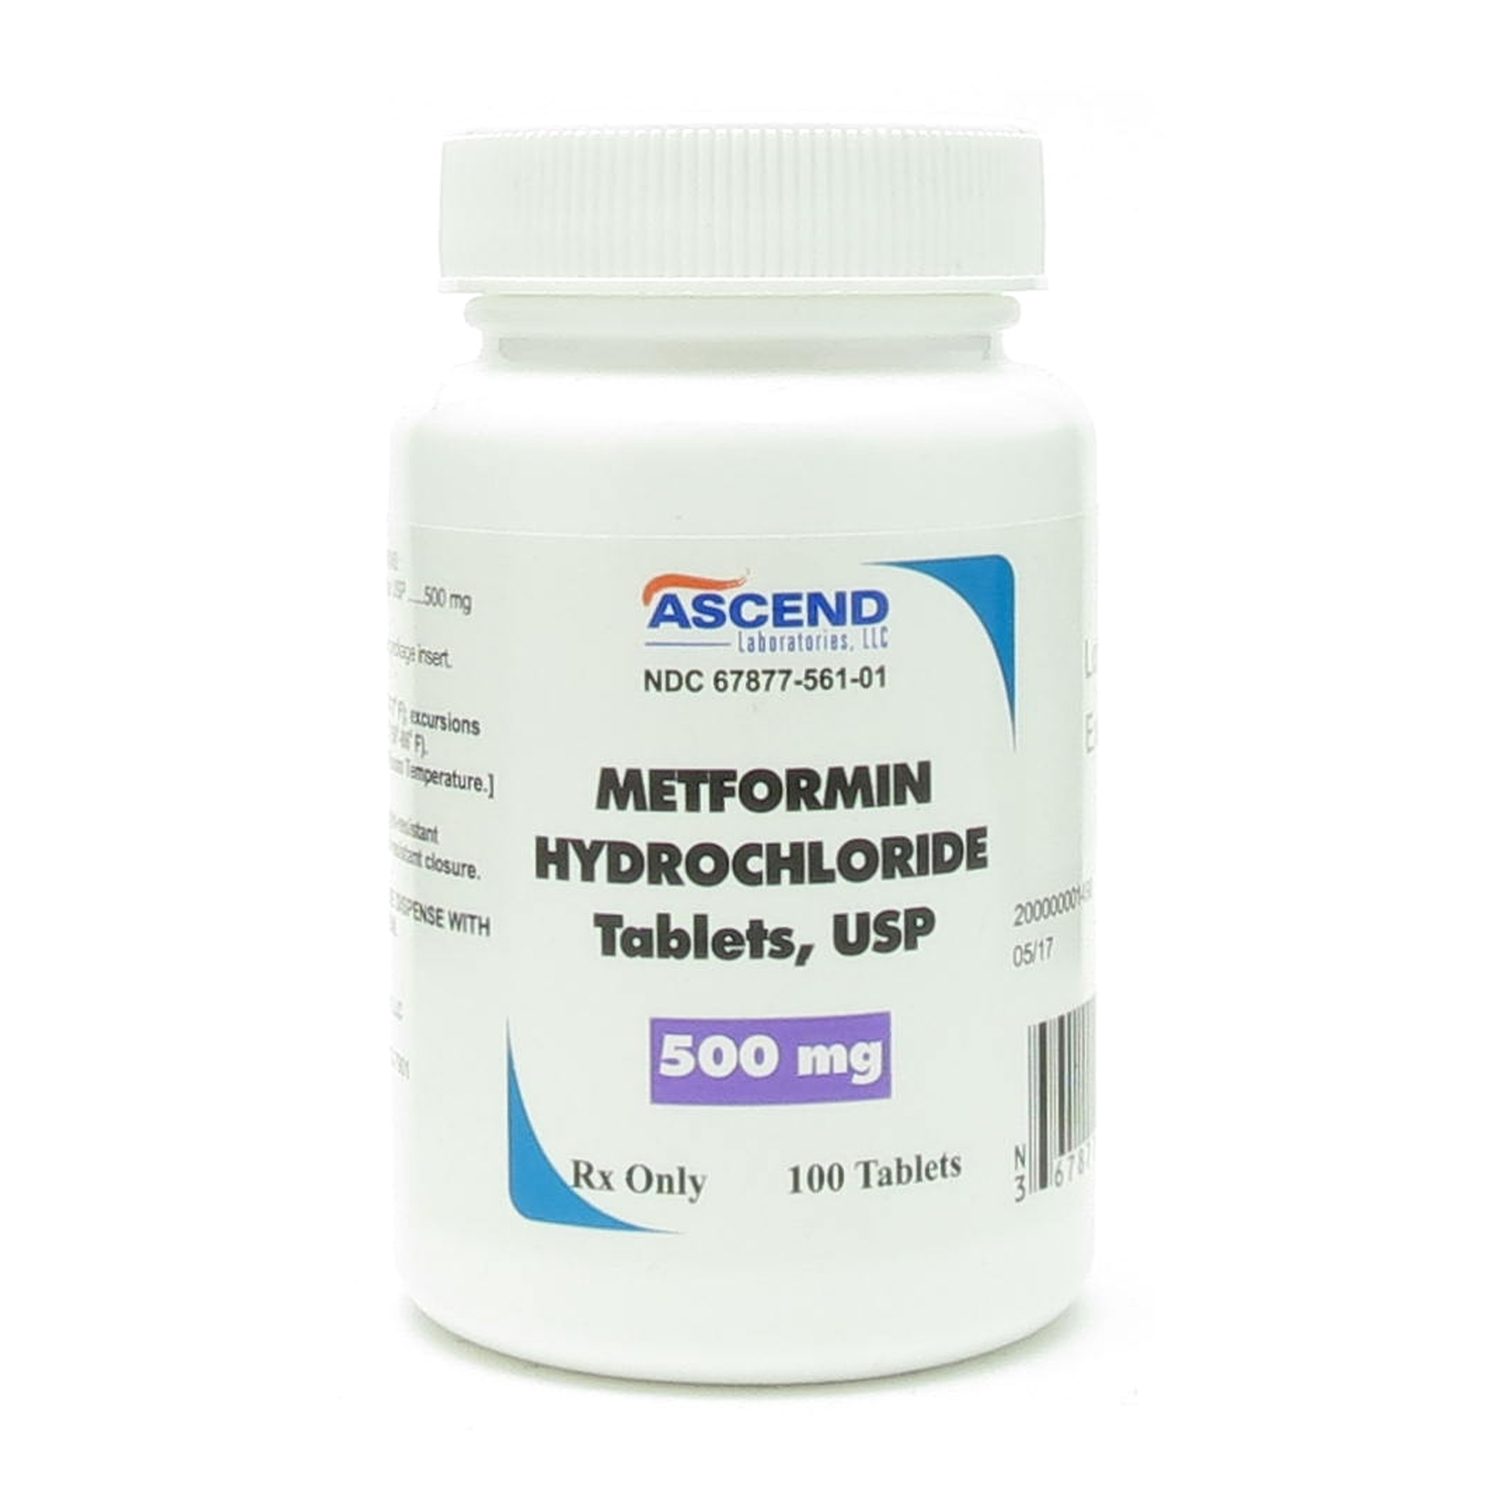 Metformin’s effects may be independent of insulin’s potential effects. In the subgroup analysis of diabetic patients who weren’t exposed to insulin, metformin remained protective. 